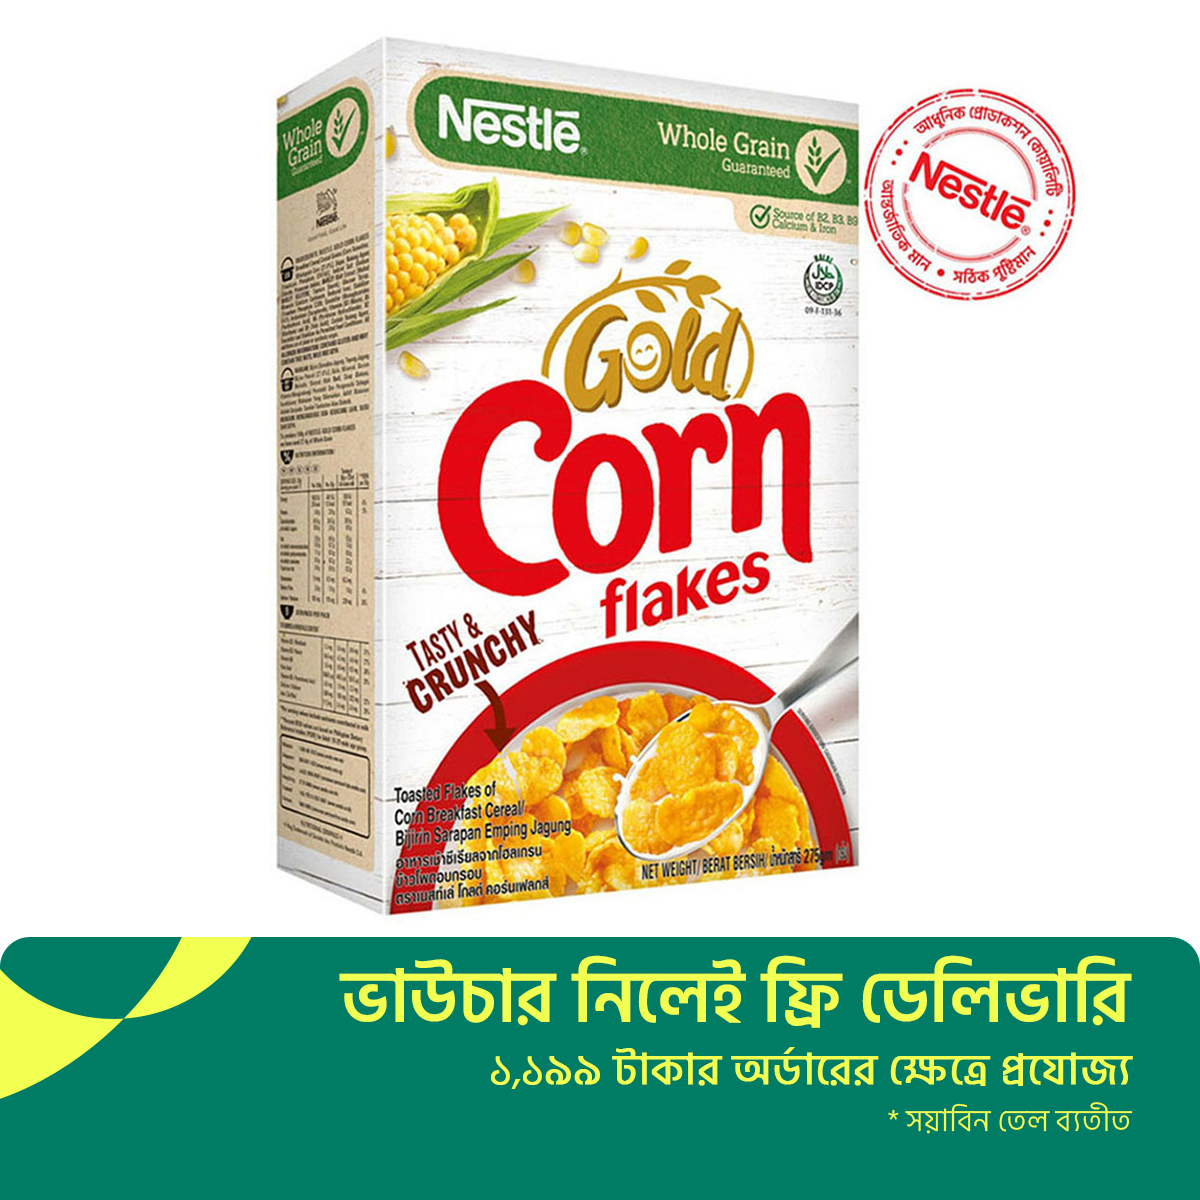 Nestle Gold Corn Flakes Breakfast Cereal Box - 275gm